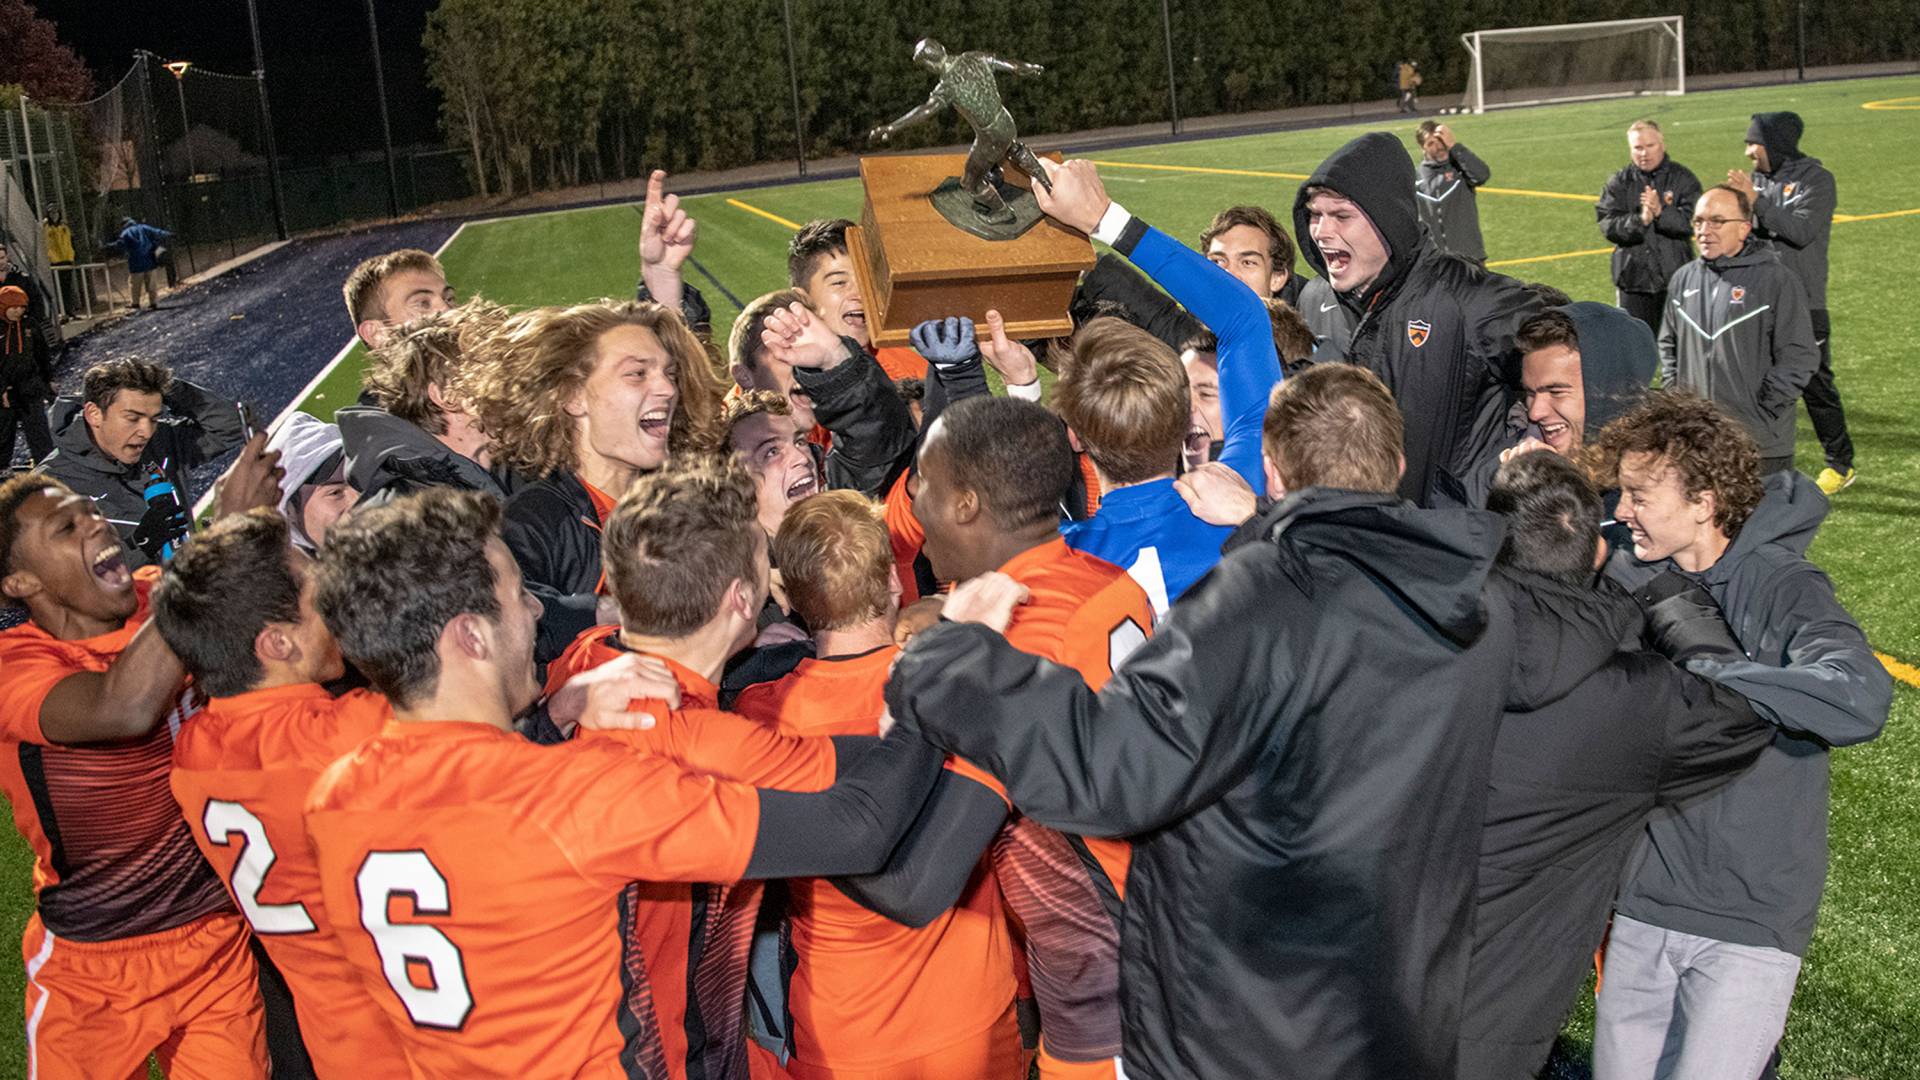 Soccer team celebrates and holds trophy